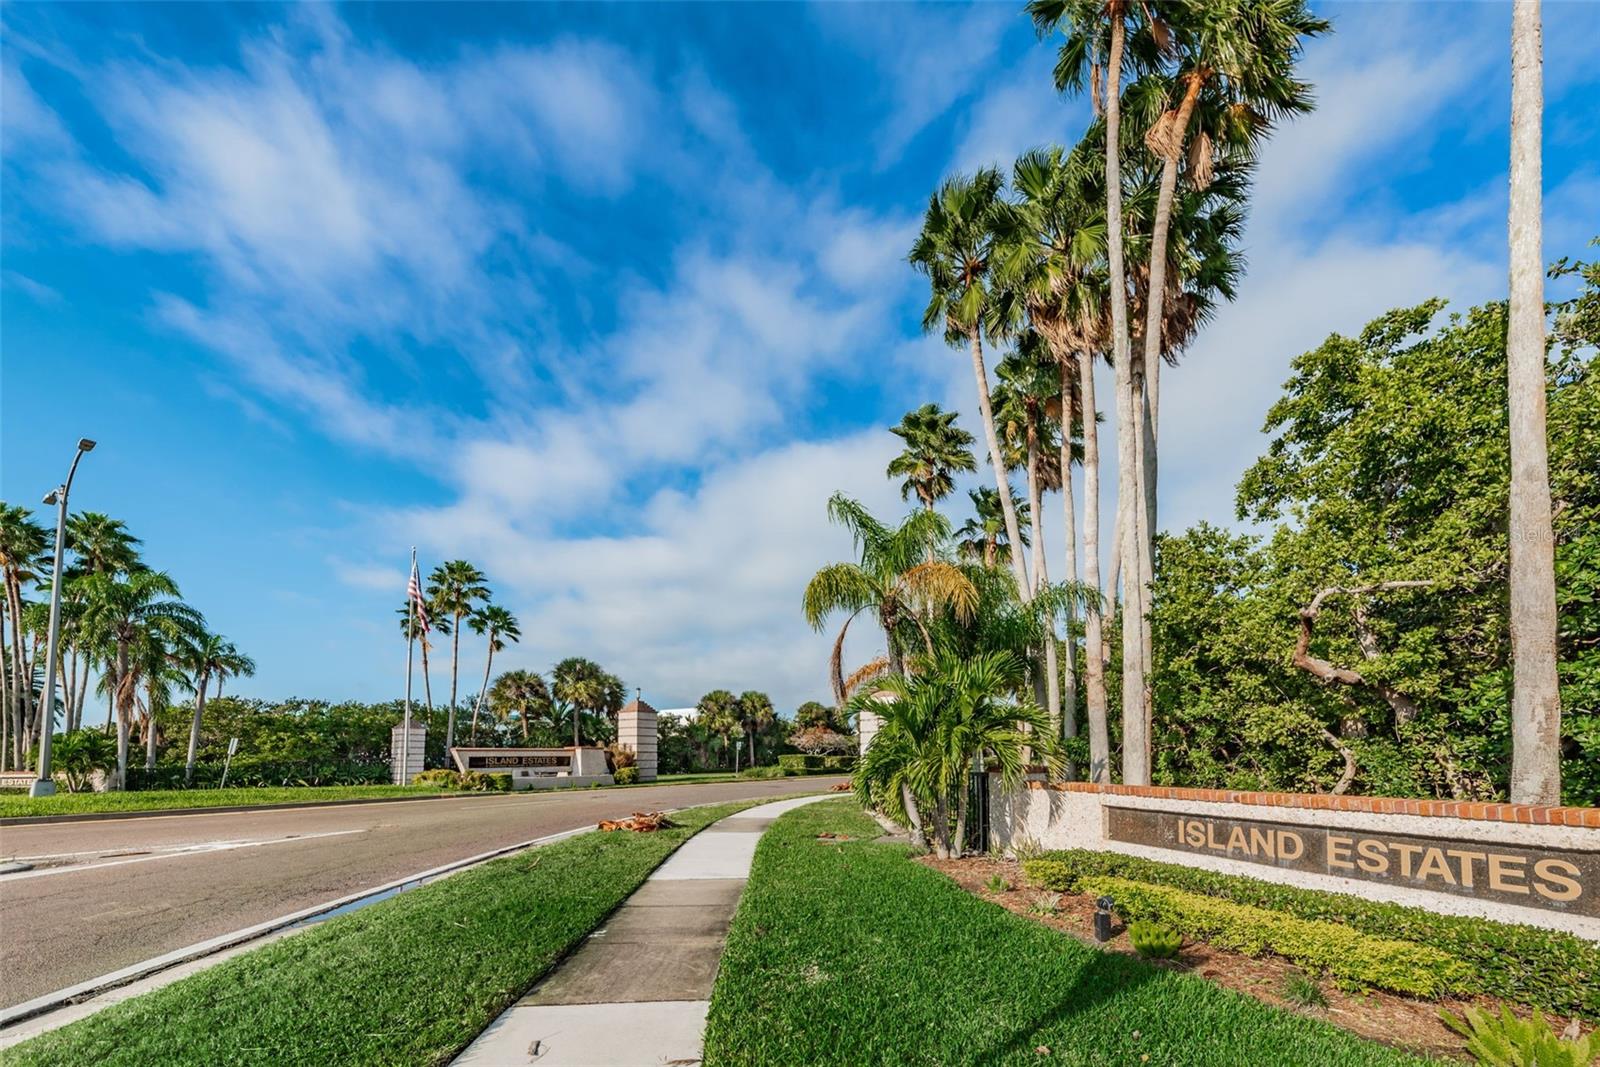 Picture yourself strolling through this distinguished neighborhood, where every residence is a testament to fine living.